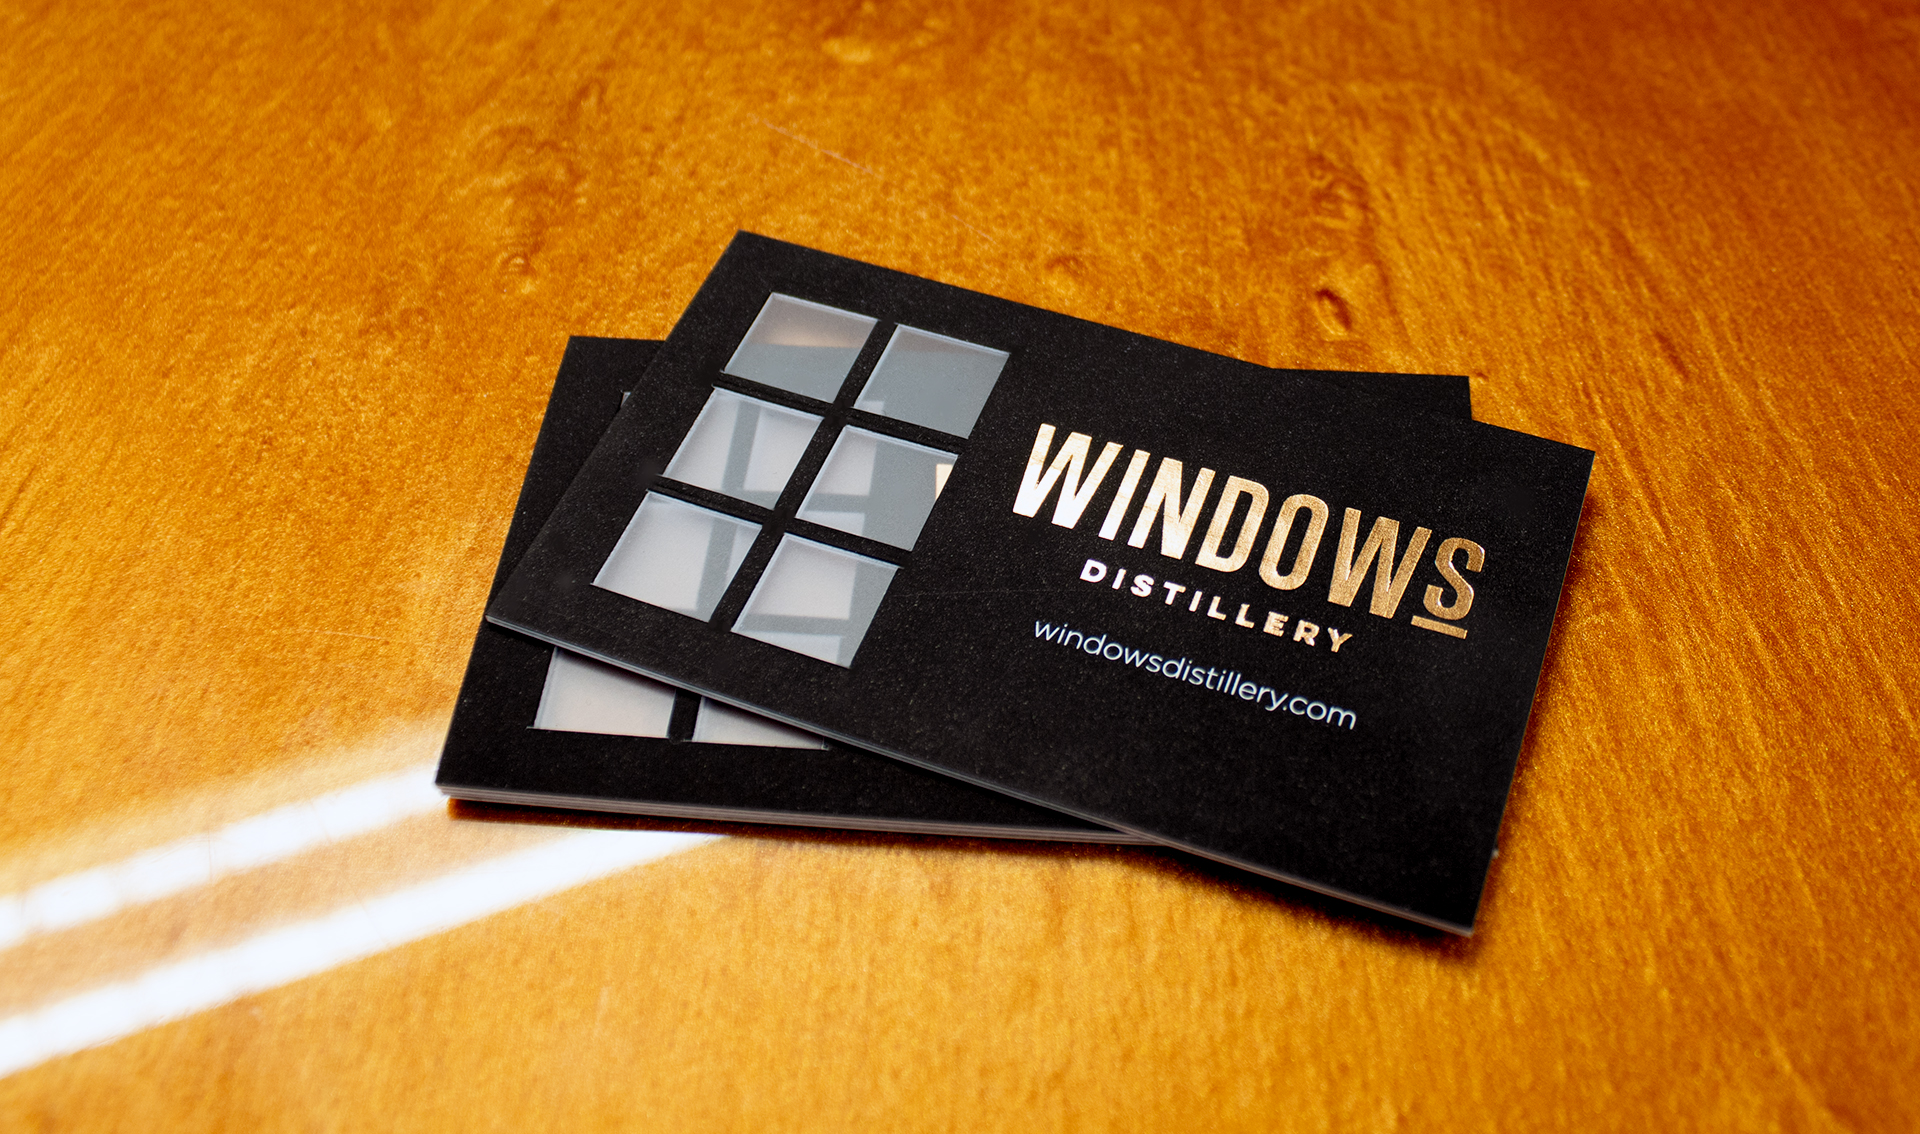 Windows Distillery business cards with luxury paper and vellum panes